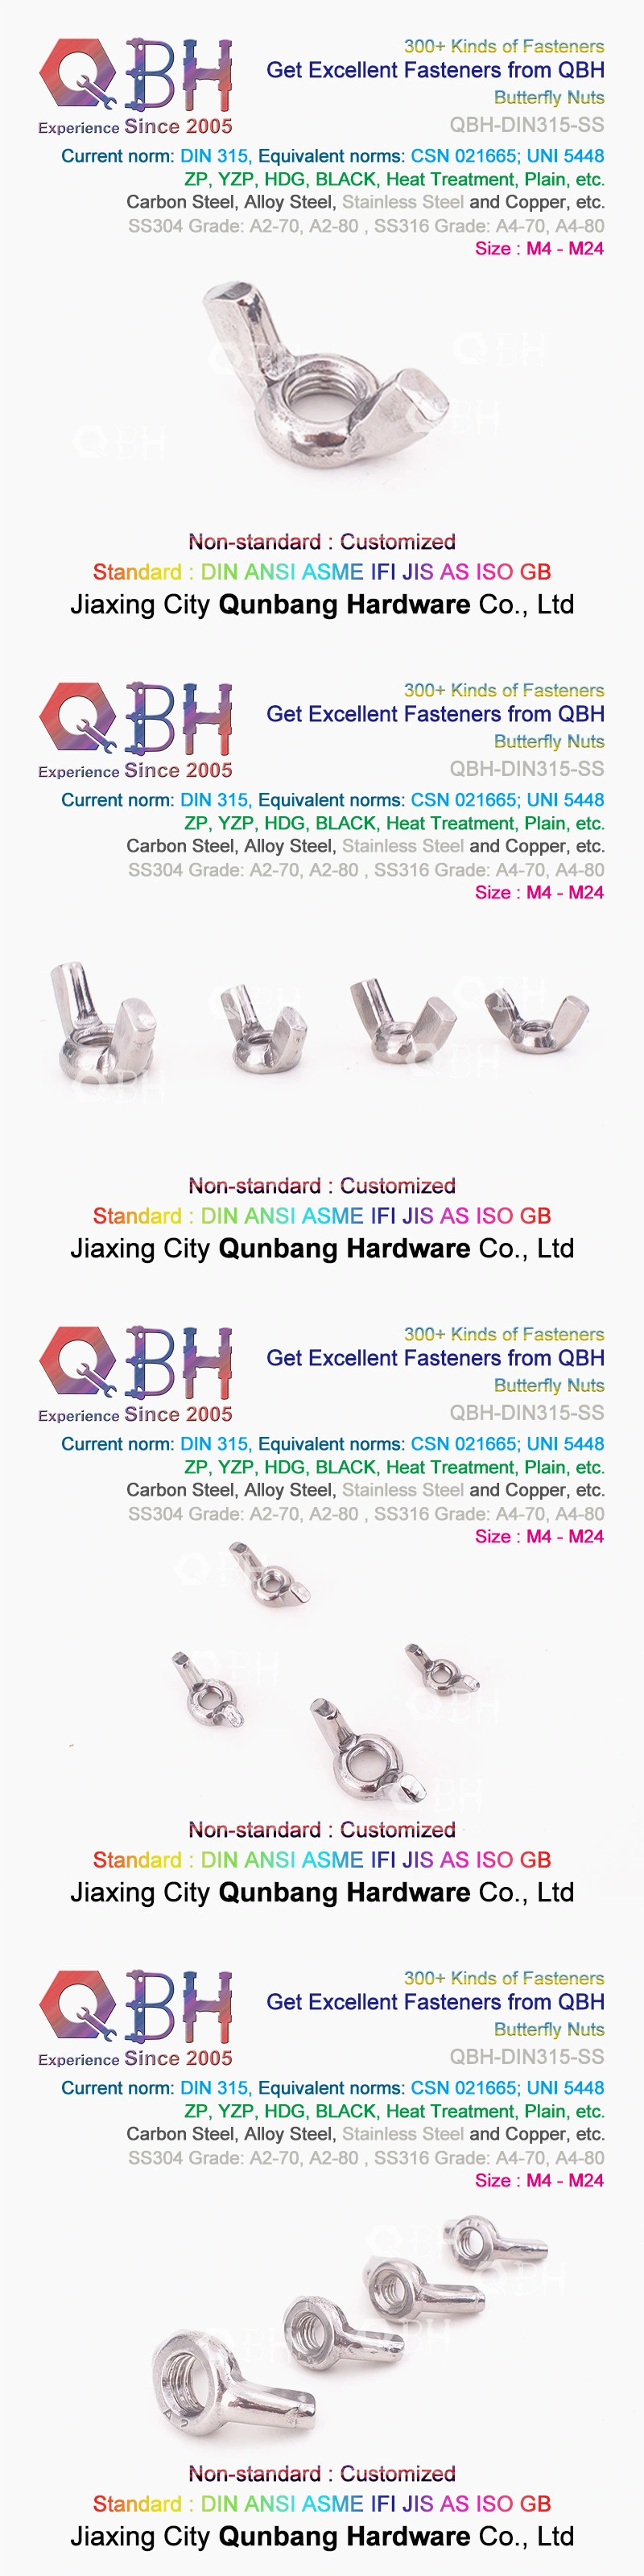 Qbh DIN315 Brass Copper Carbon Stainless Steel Square Rectangular Handle Butterfly Wing Nuts